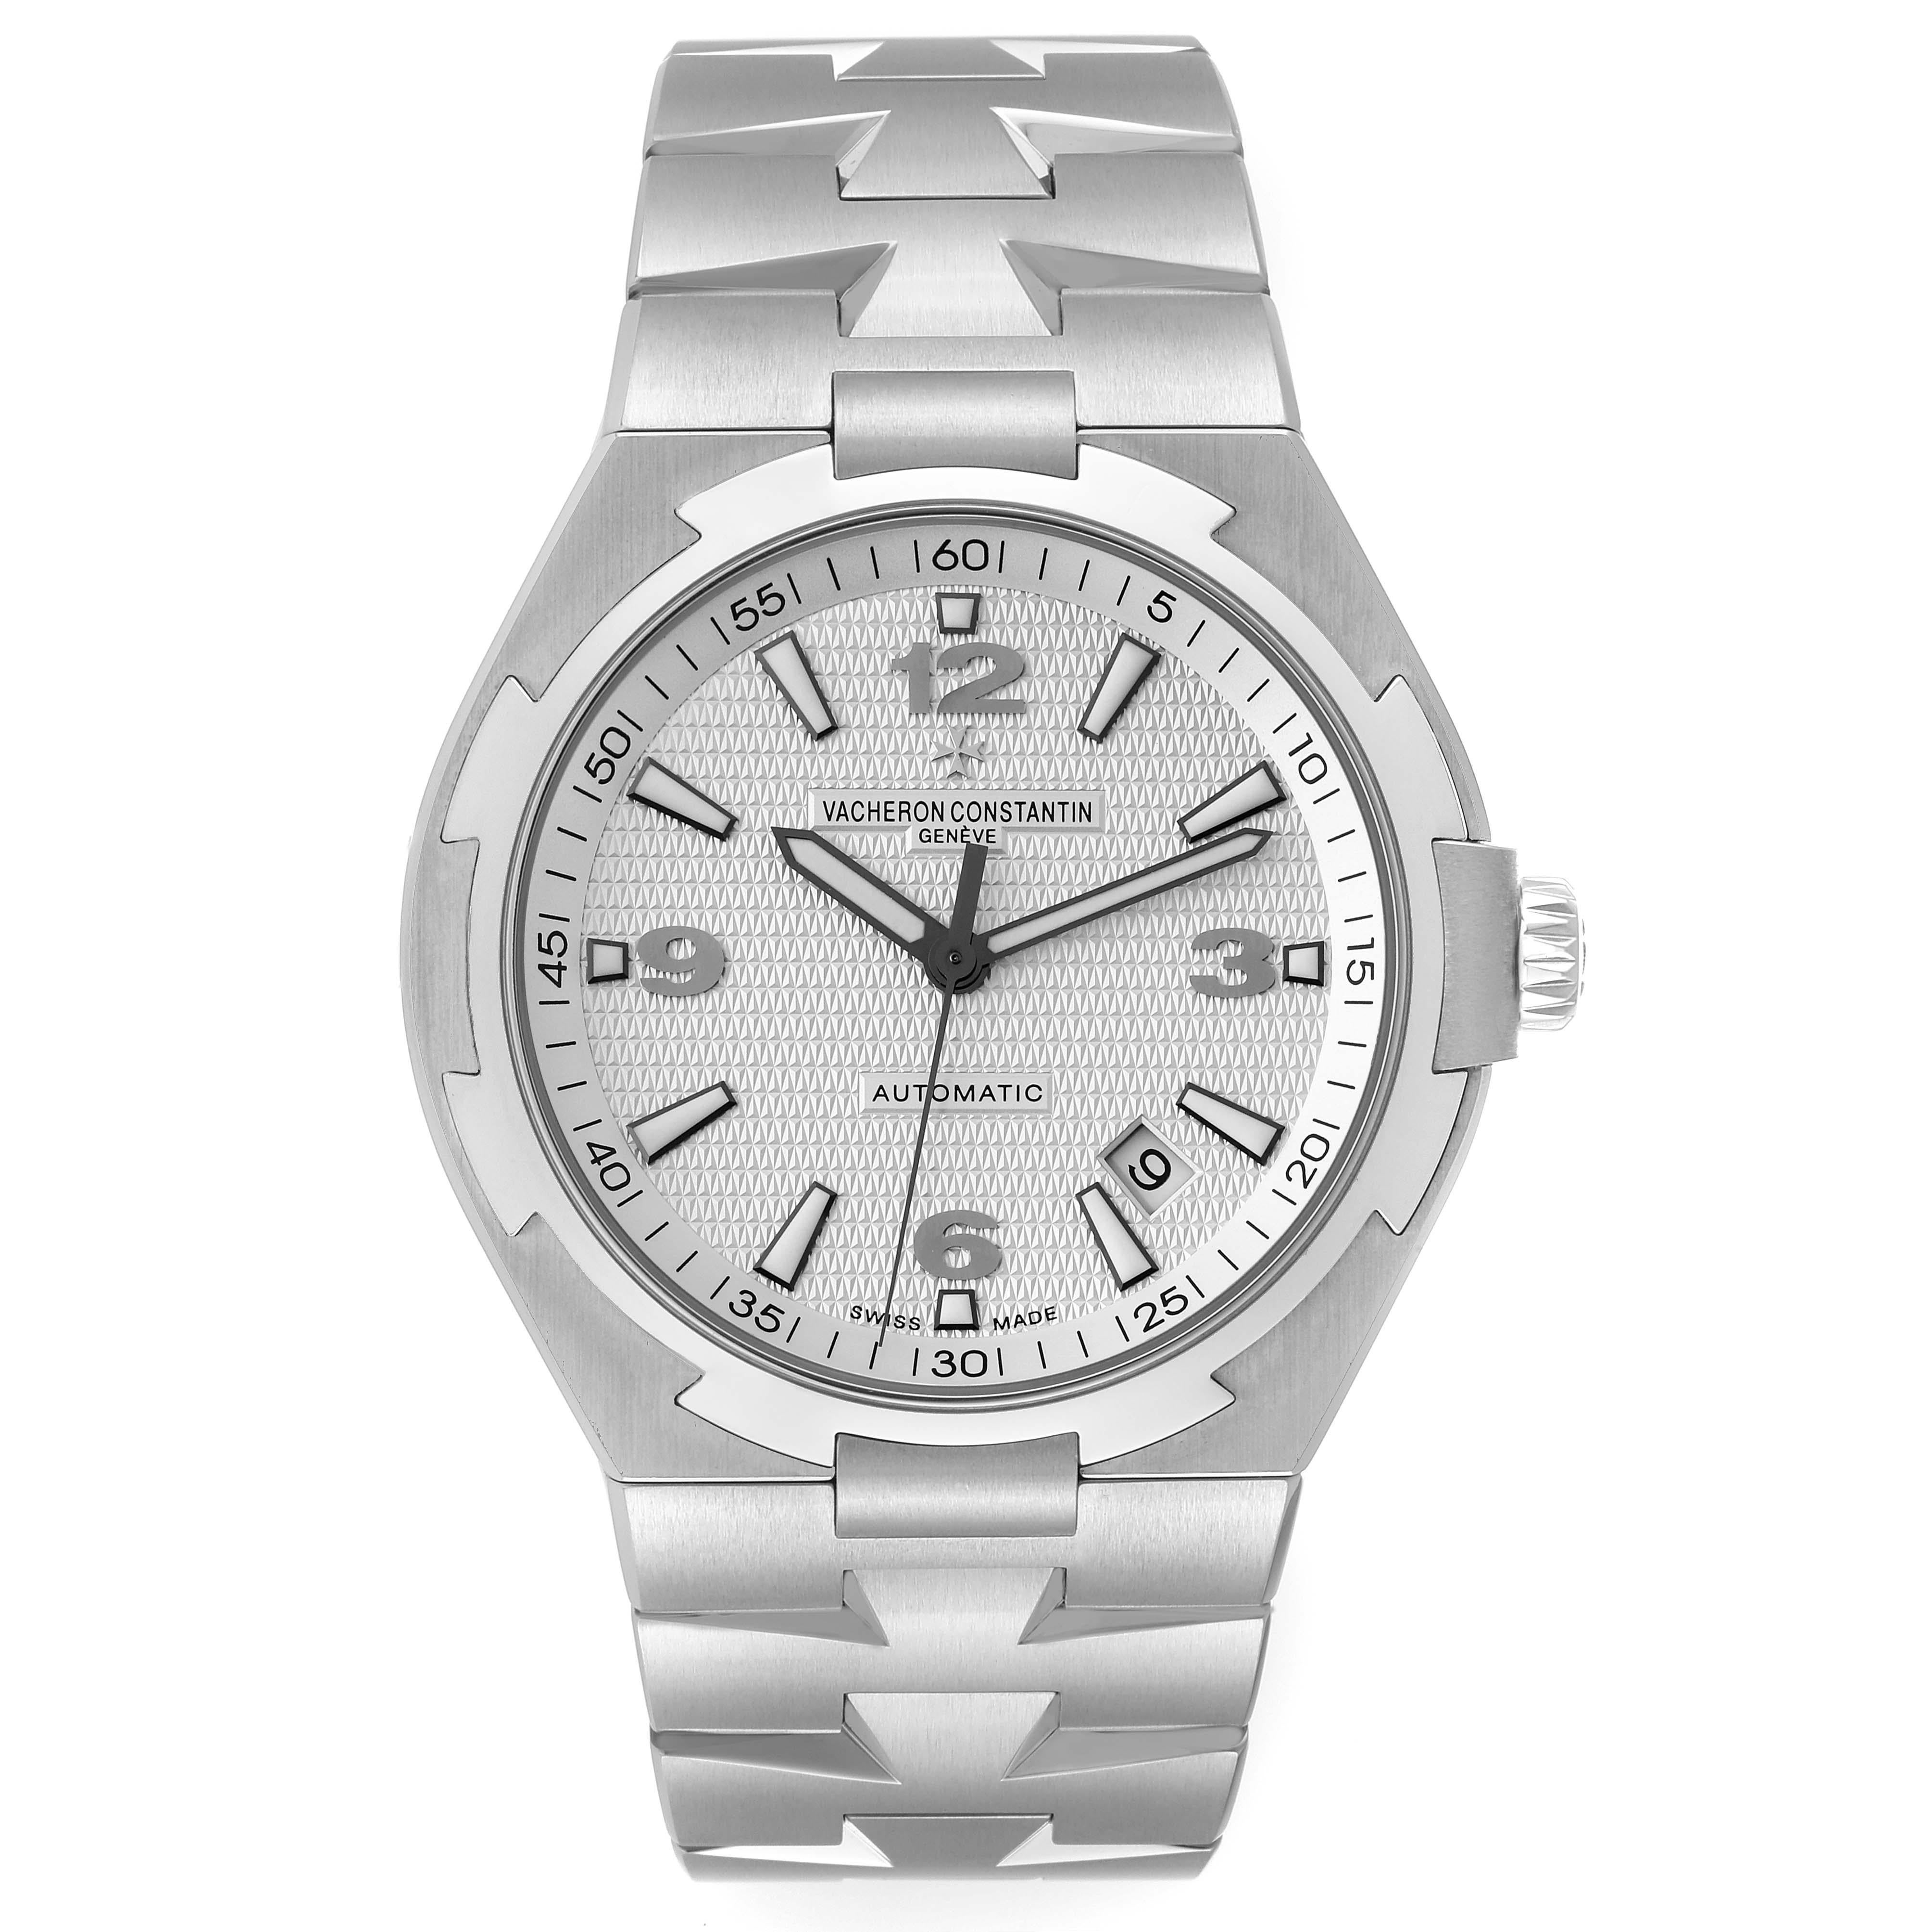 Vacheron Constantin Overseas Silver Dial Steel Mens Watch 47040 Box Papers. Automatic self-winding movement. Brushed stainless steel case 42.5 mm in diameter. Screwed down crown. Logo on a crown. Solid caseback with 'overseas' medalion. Polished